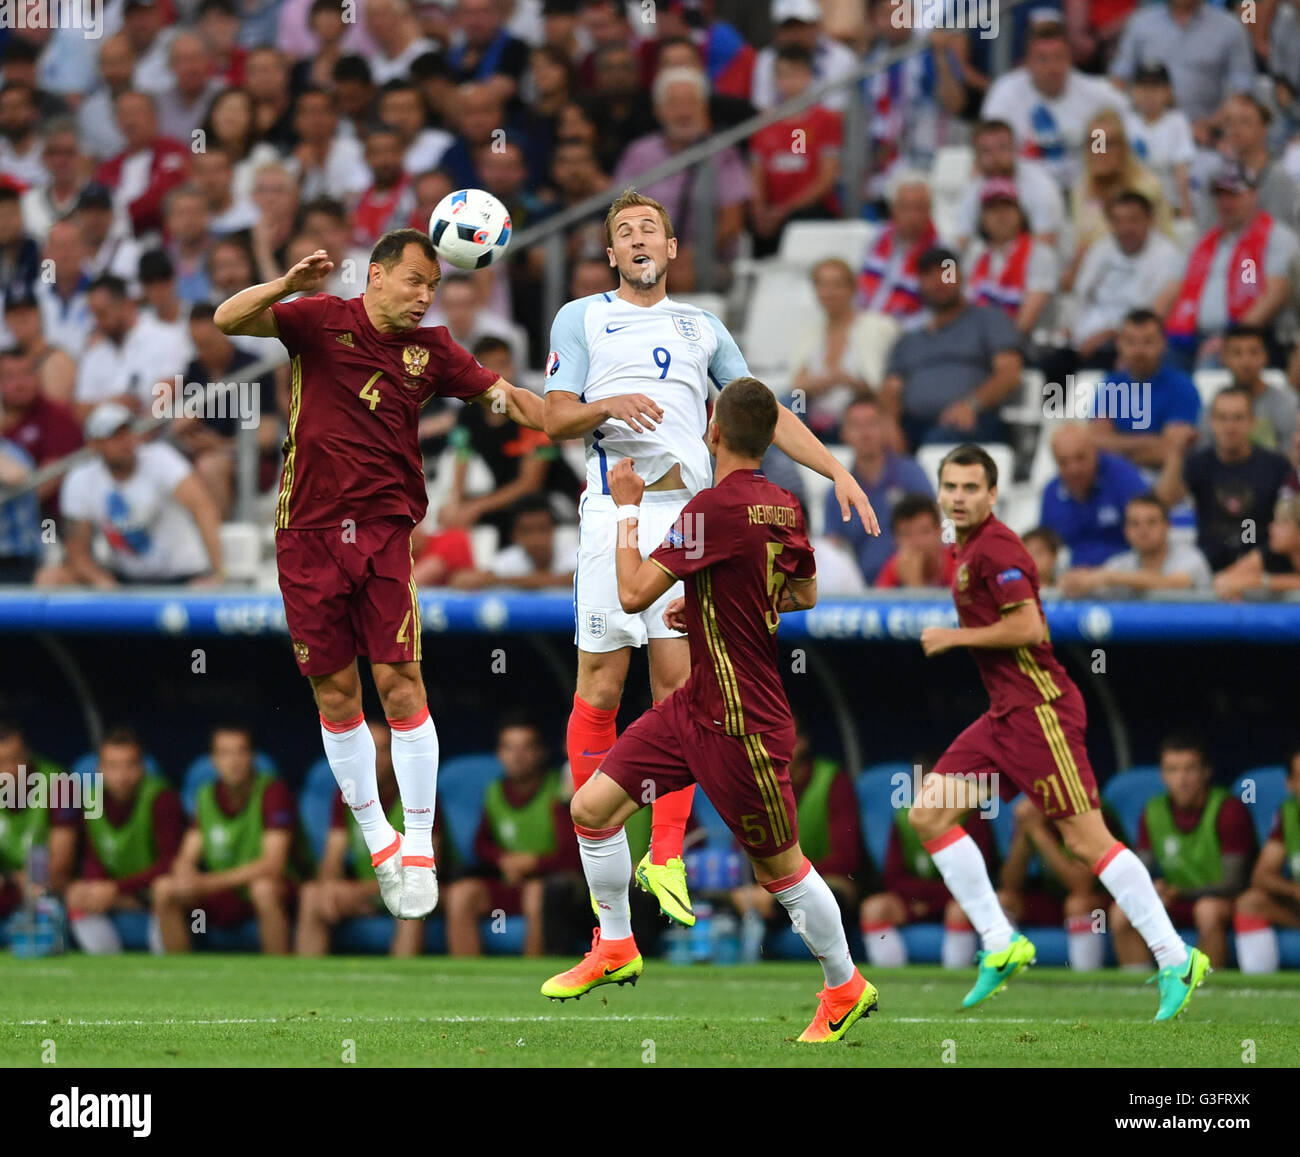 Marseille, France. 11th June, 2016. Harry Kane (2nd L) of England vies with Sergei Ignashevich (1st L) of Russia during the Euro 2016 Group B soccer match between Russia and England in Marseille, France, June 11, 2016. © Tao Xiyi/Xinhua/Alamy Live News Stock Photo